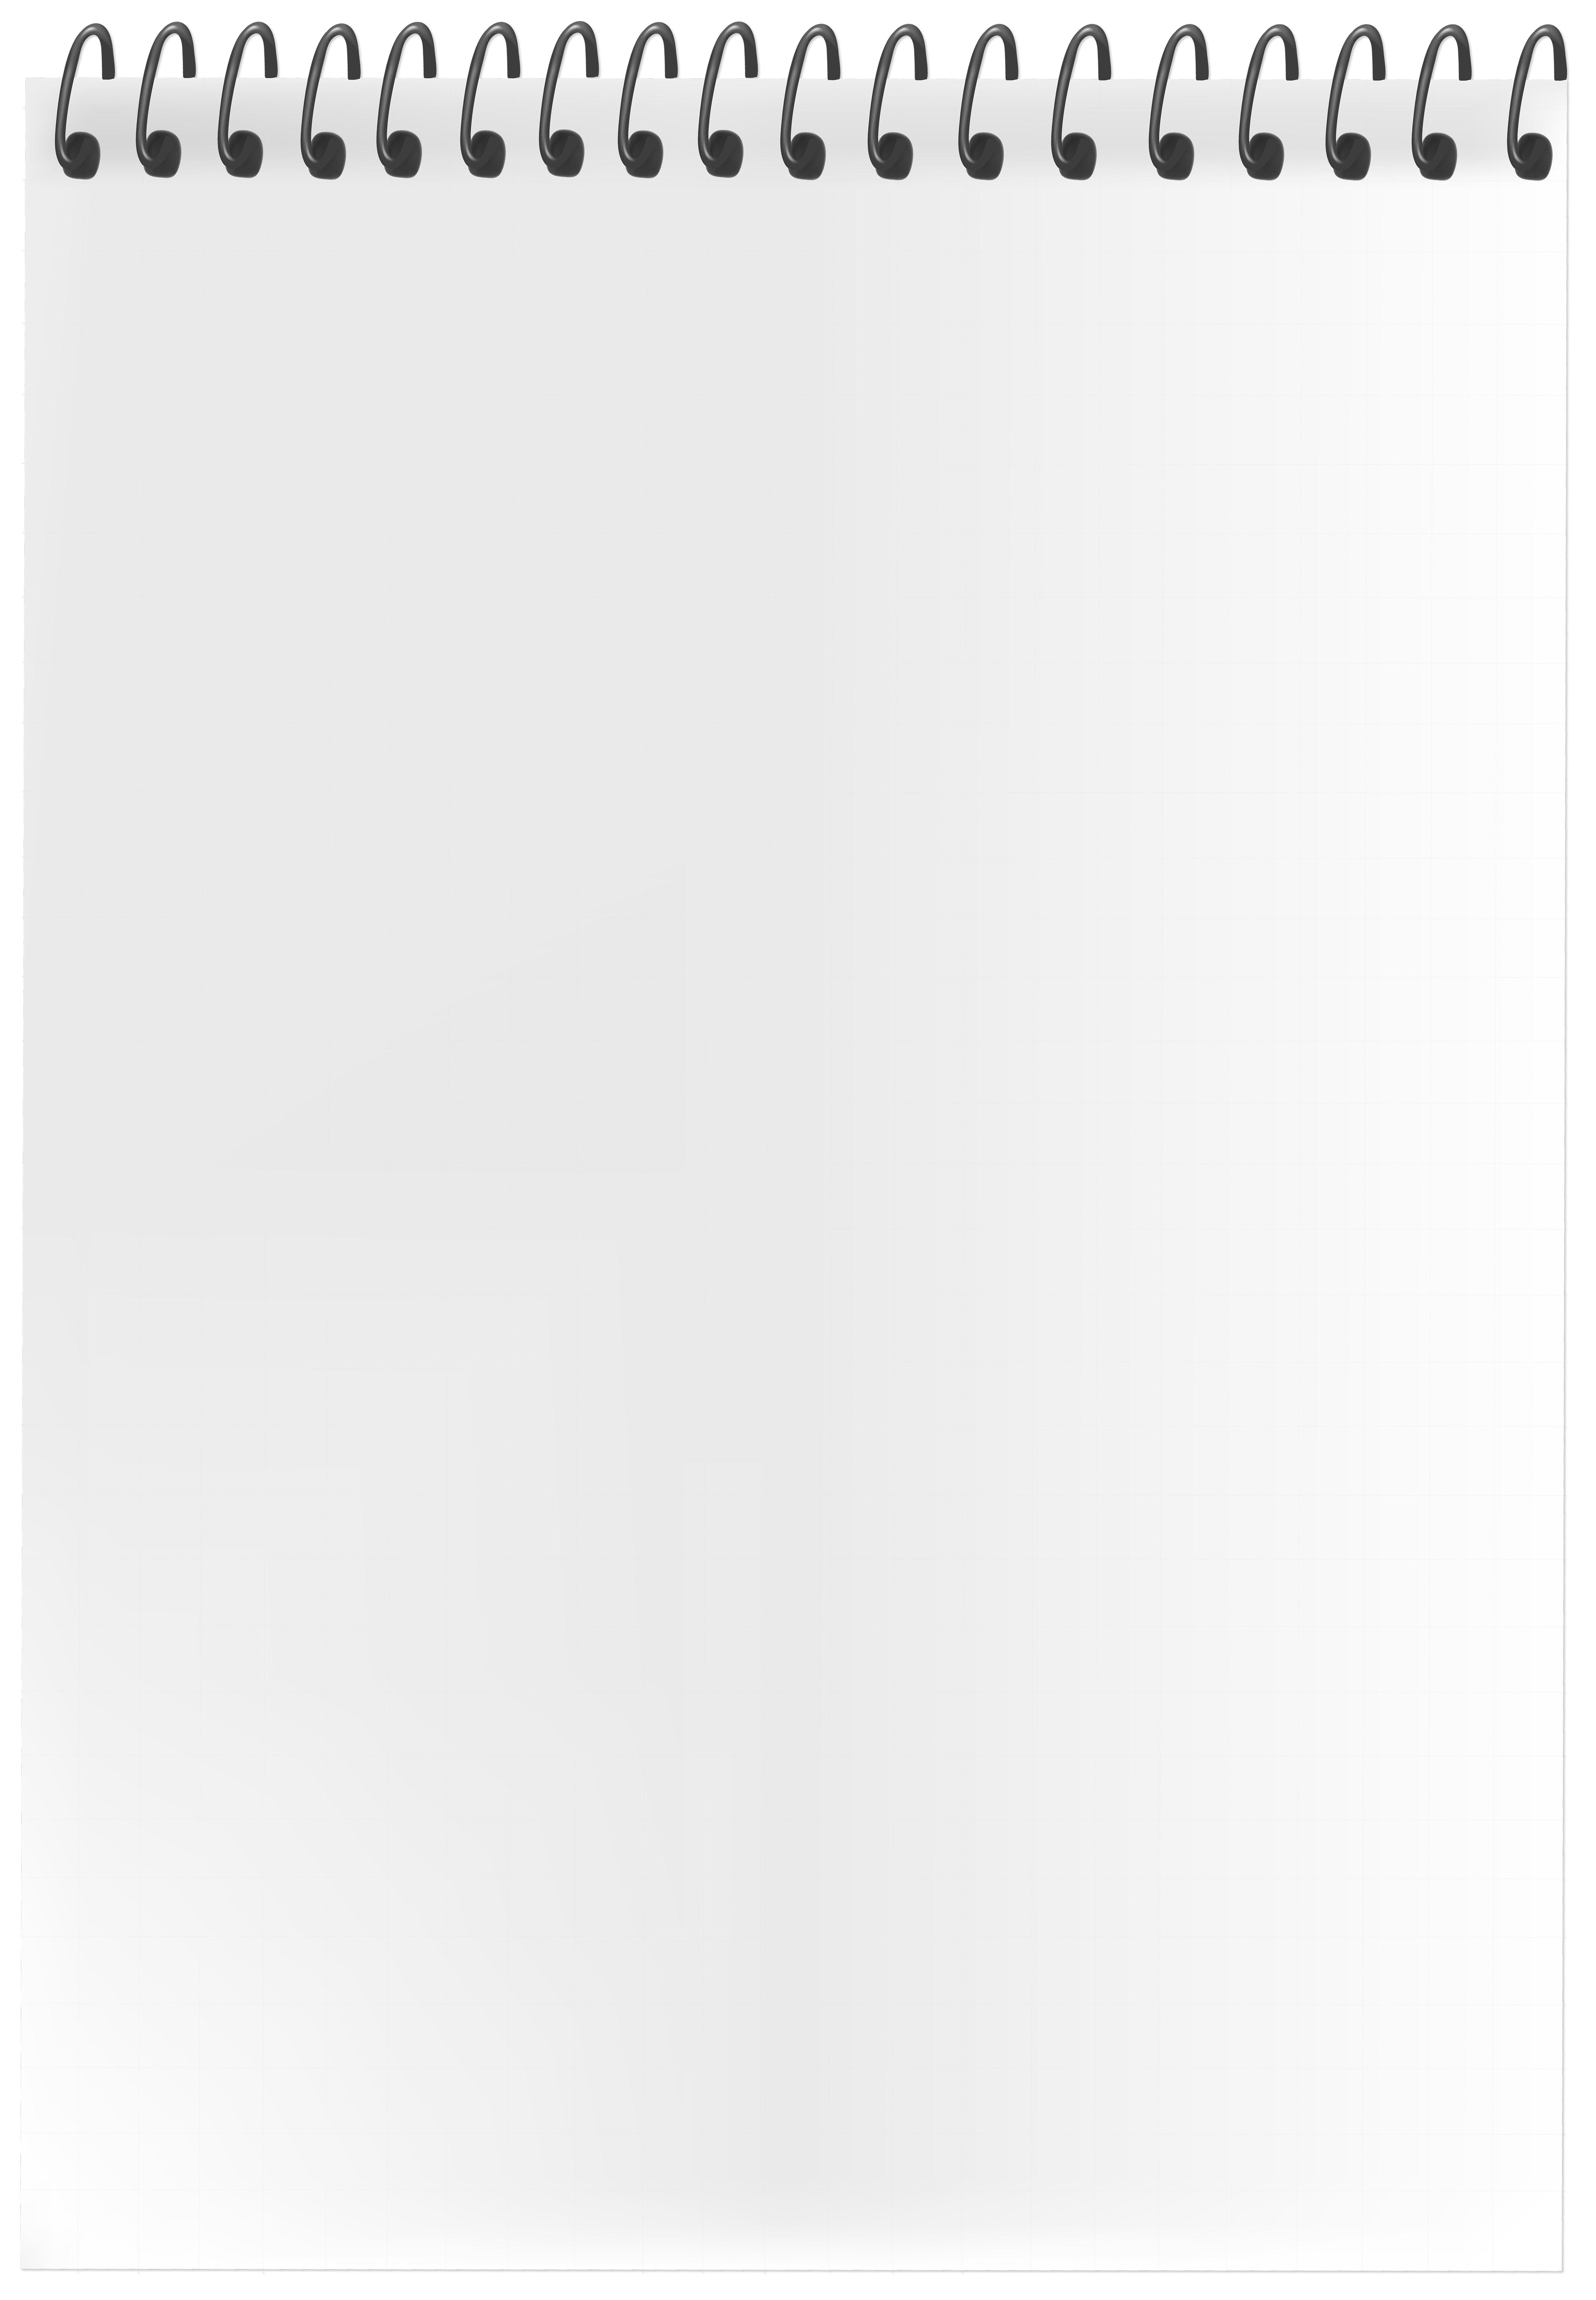 Spiral Blank Page PNG Clip Art Image.